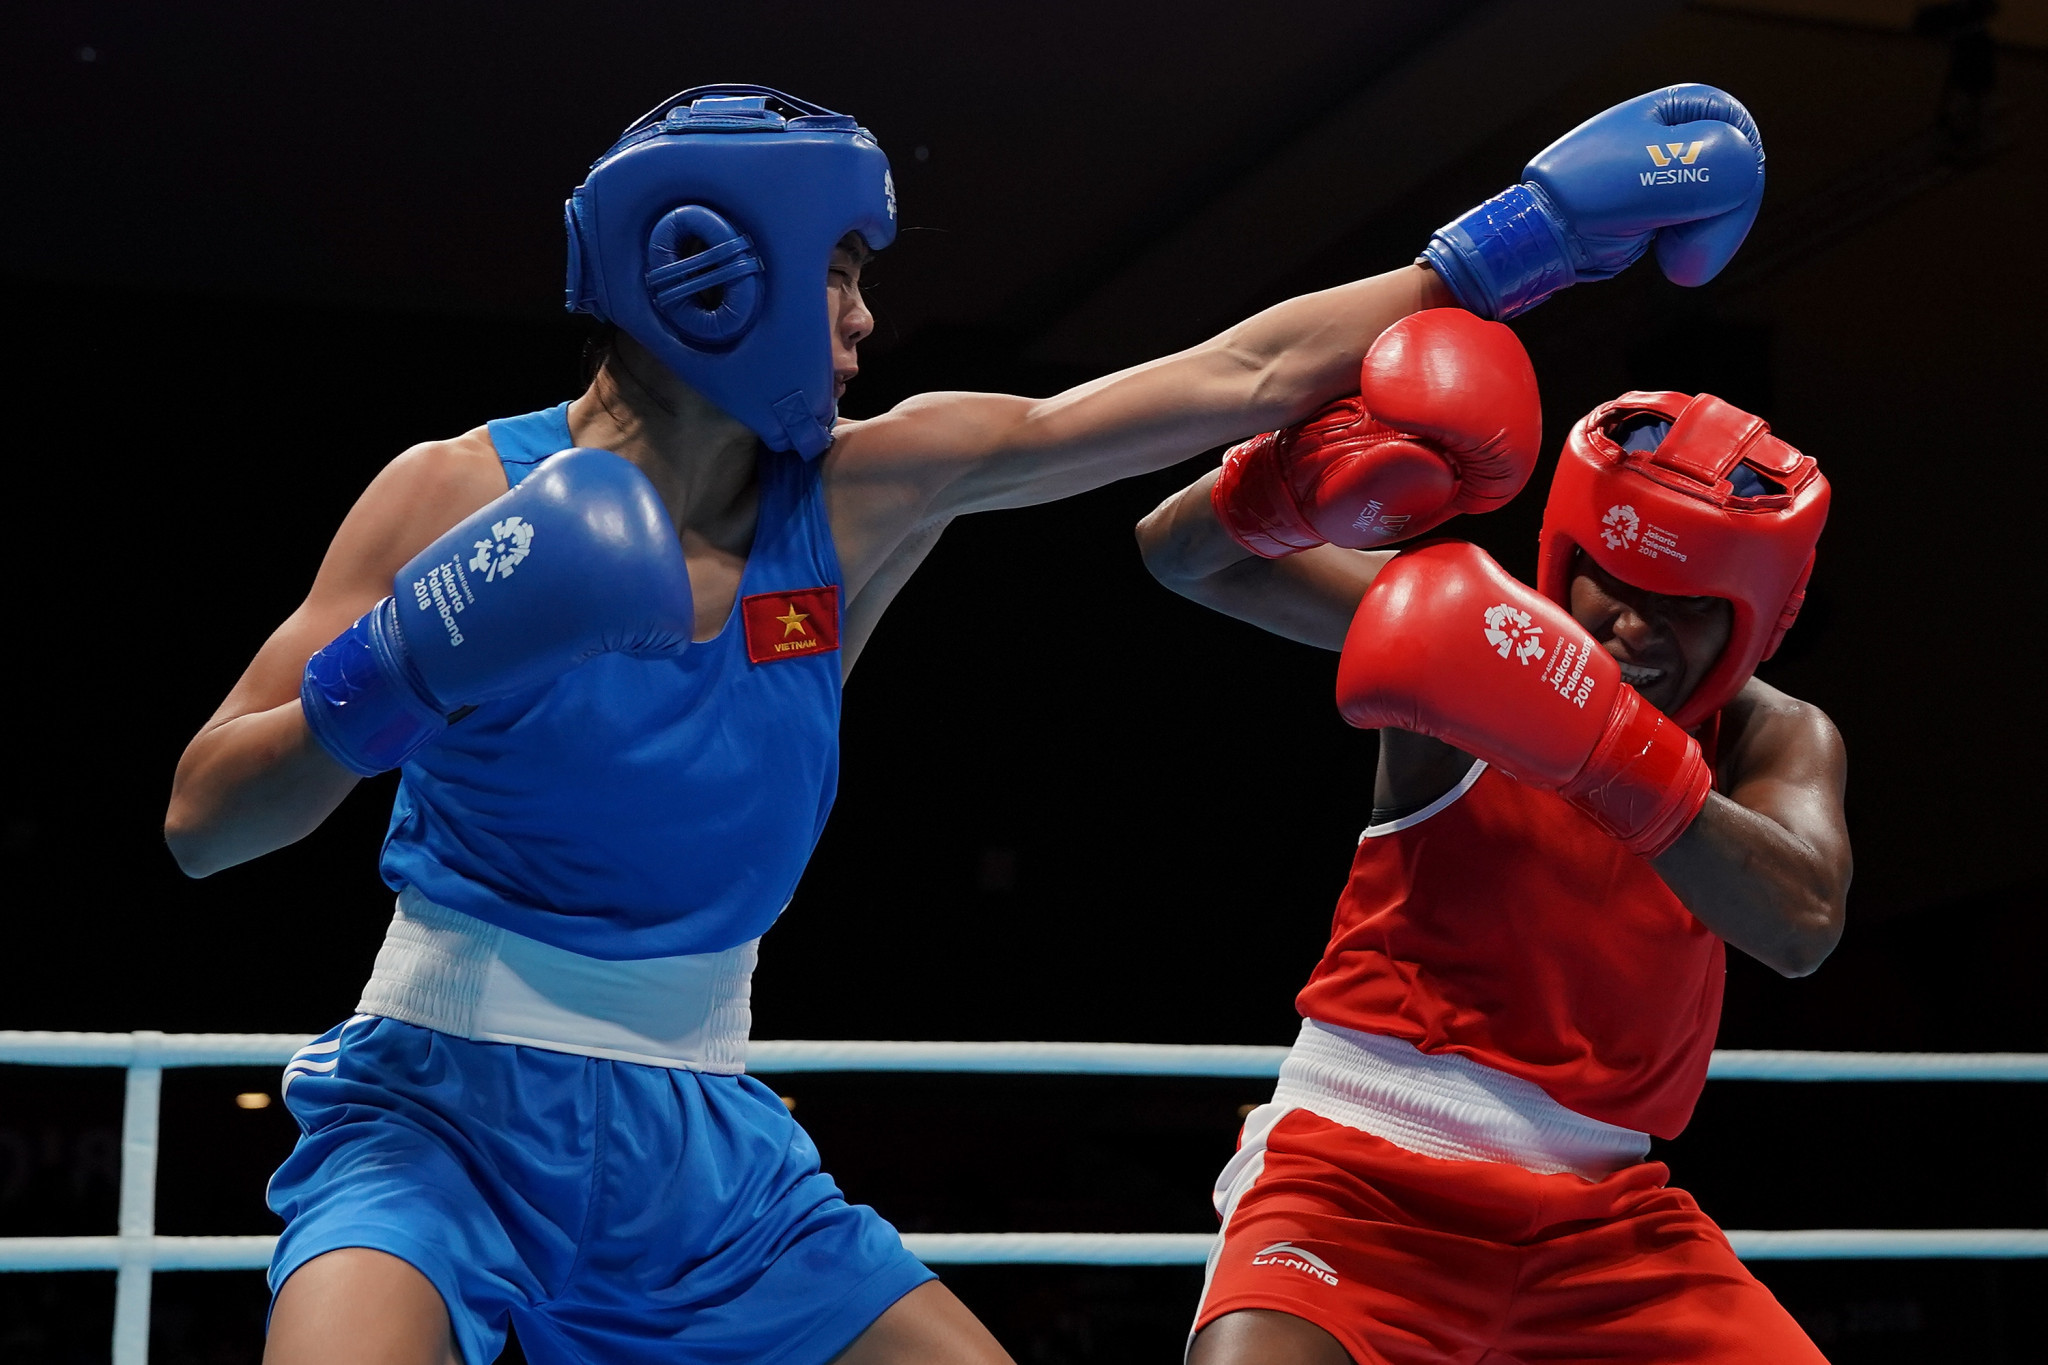 Thi Vy Vuong won the women's unde-57kg boxing title for Vietnam ©Getty Images